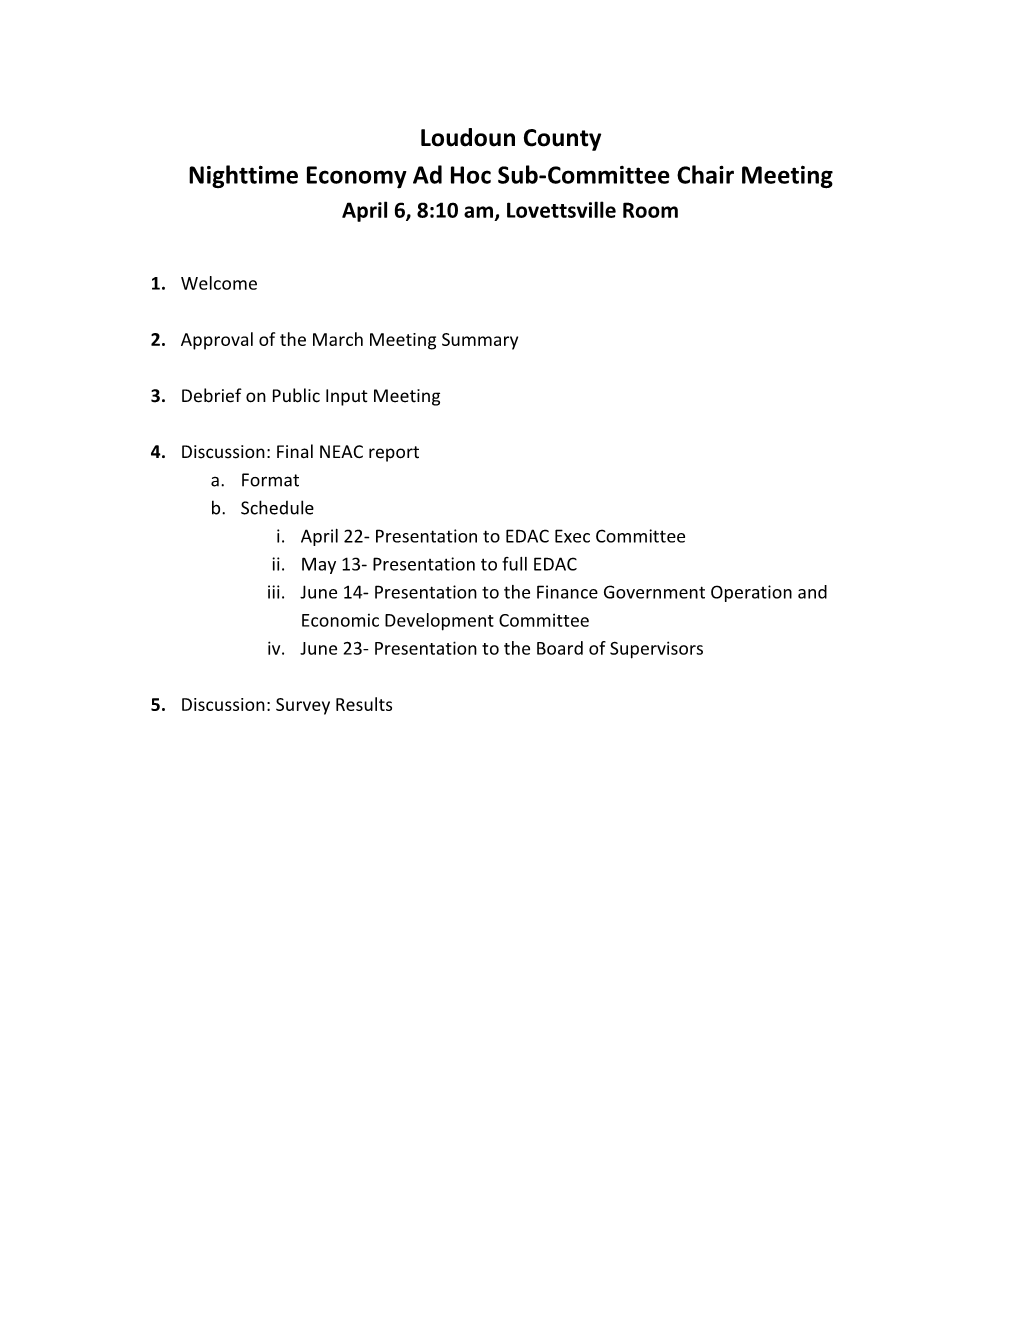 Loudoun County Nighttime Economy Ad Hoc Sub-Committee Chair Meeting April 6, 8:10 Am, Lovettsville Room